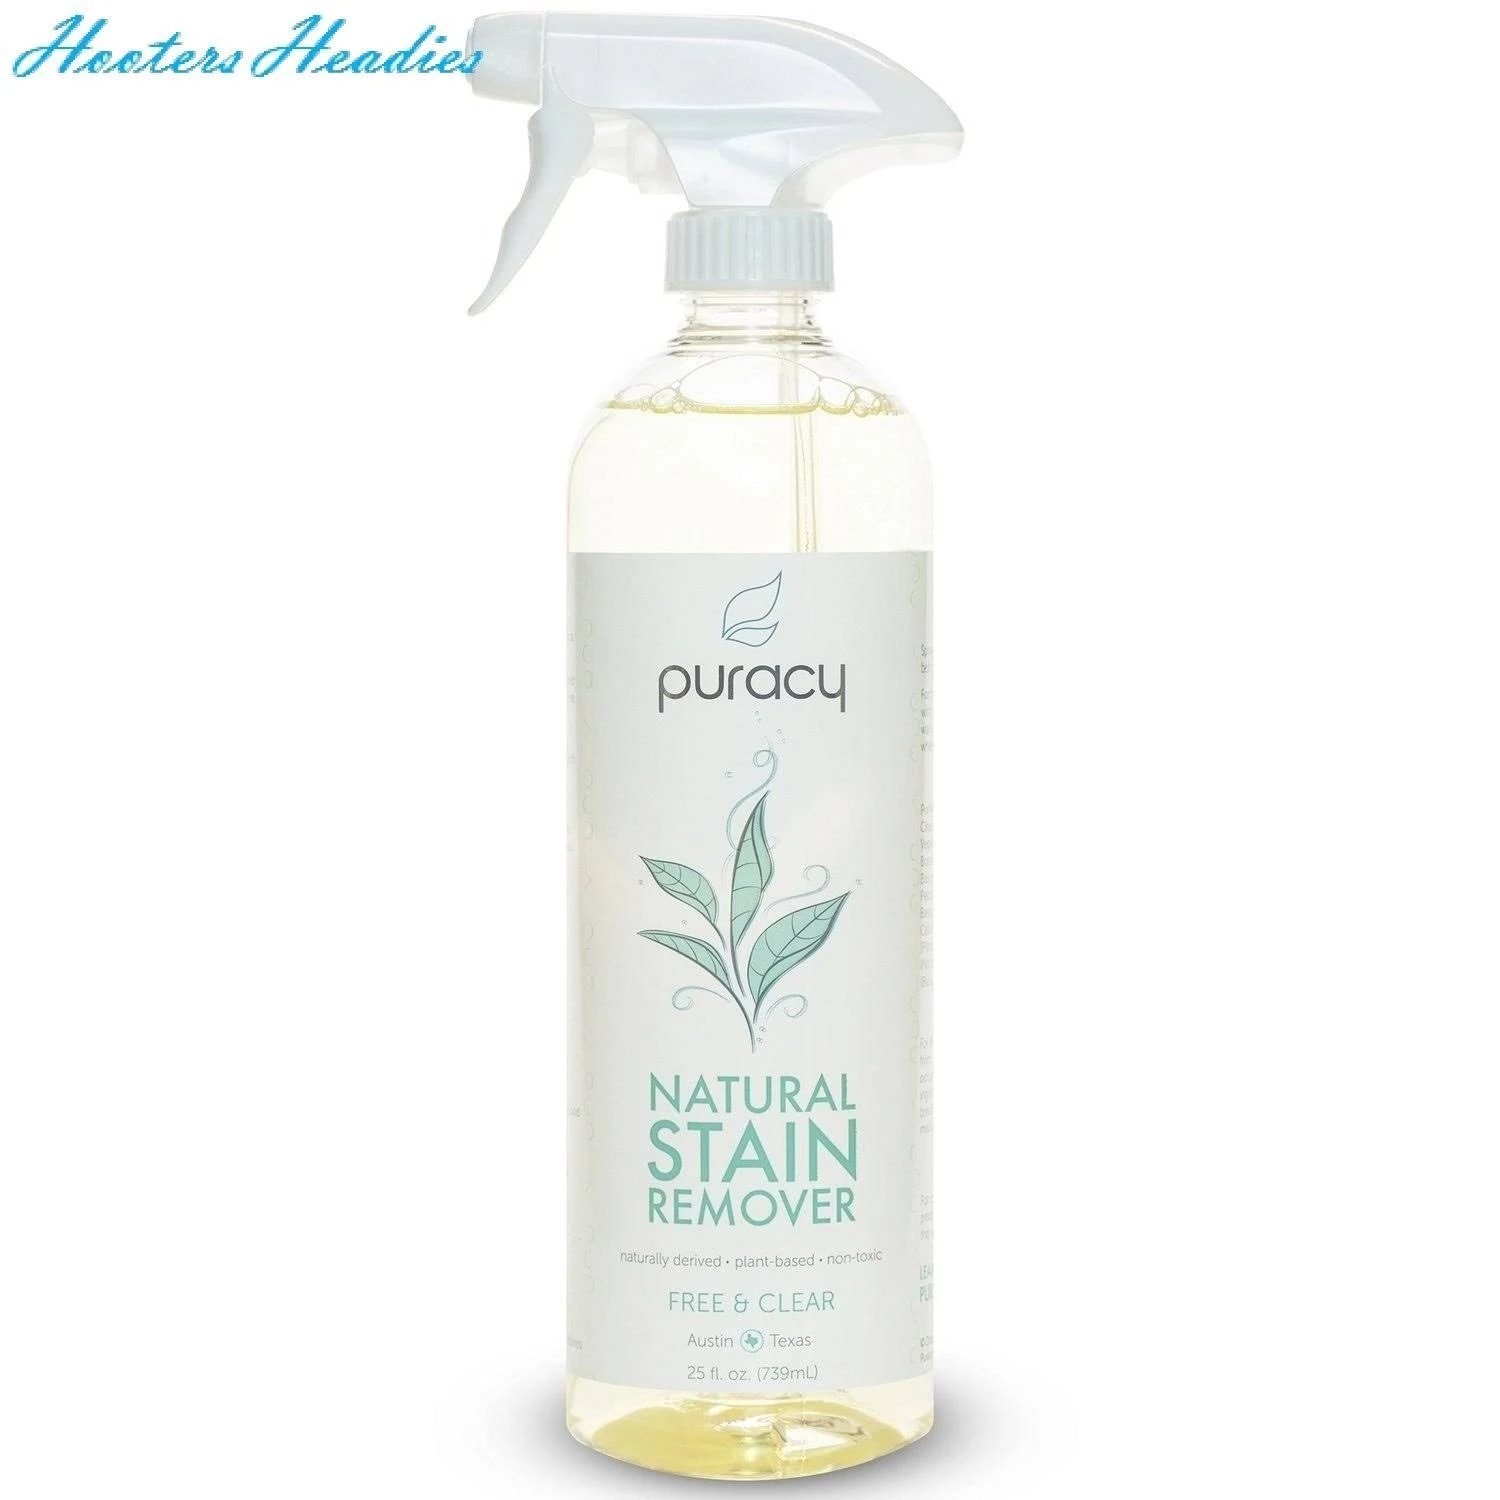 Puracy Natural Stain Remover